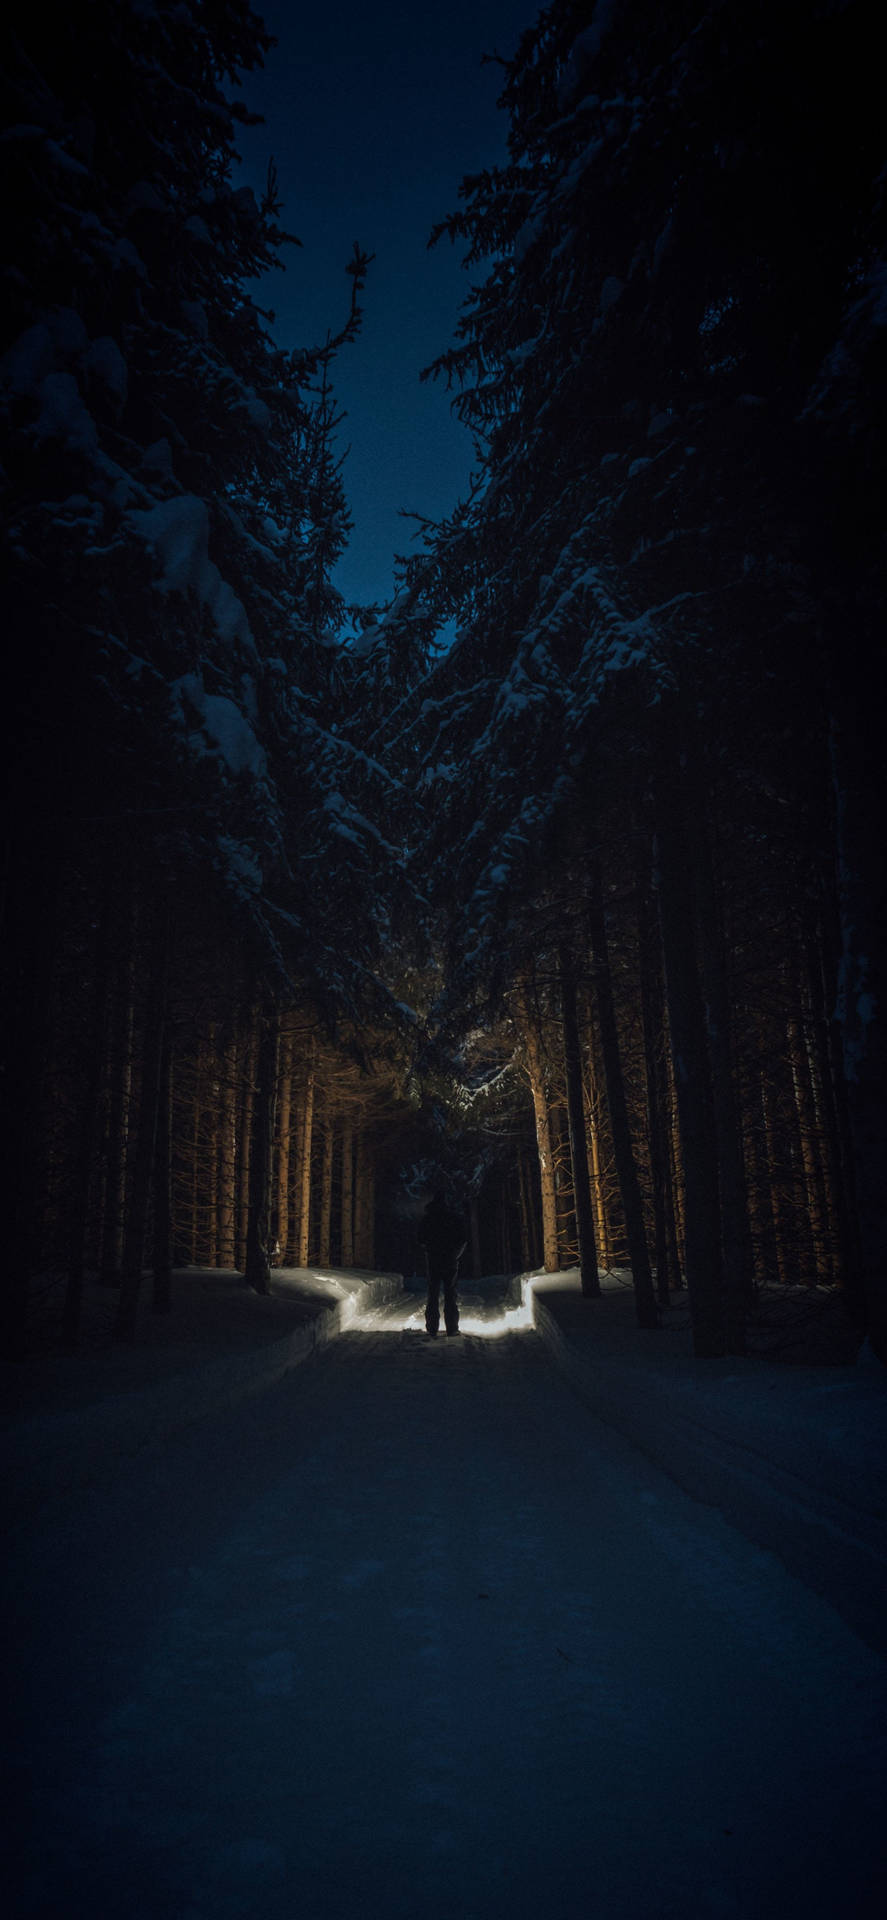 Dark Night In Snow-covered Forest